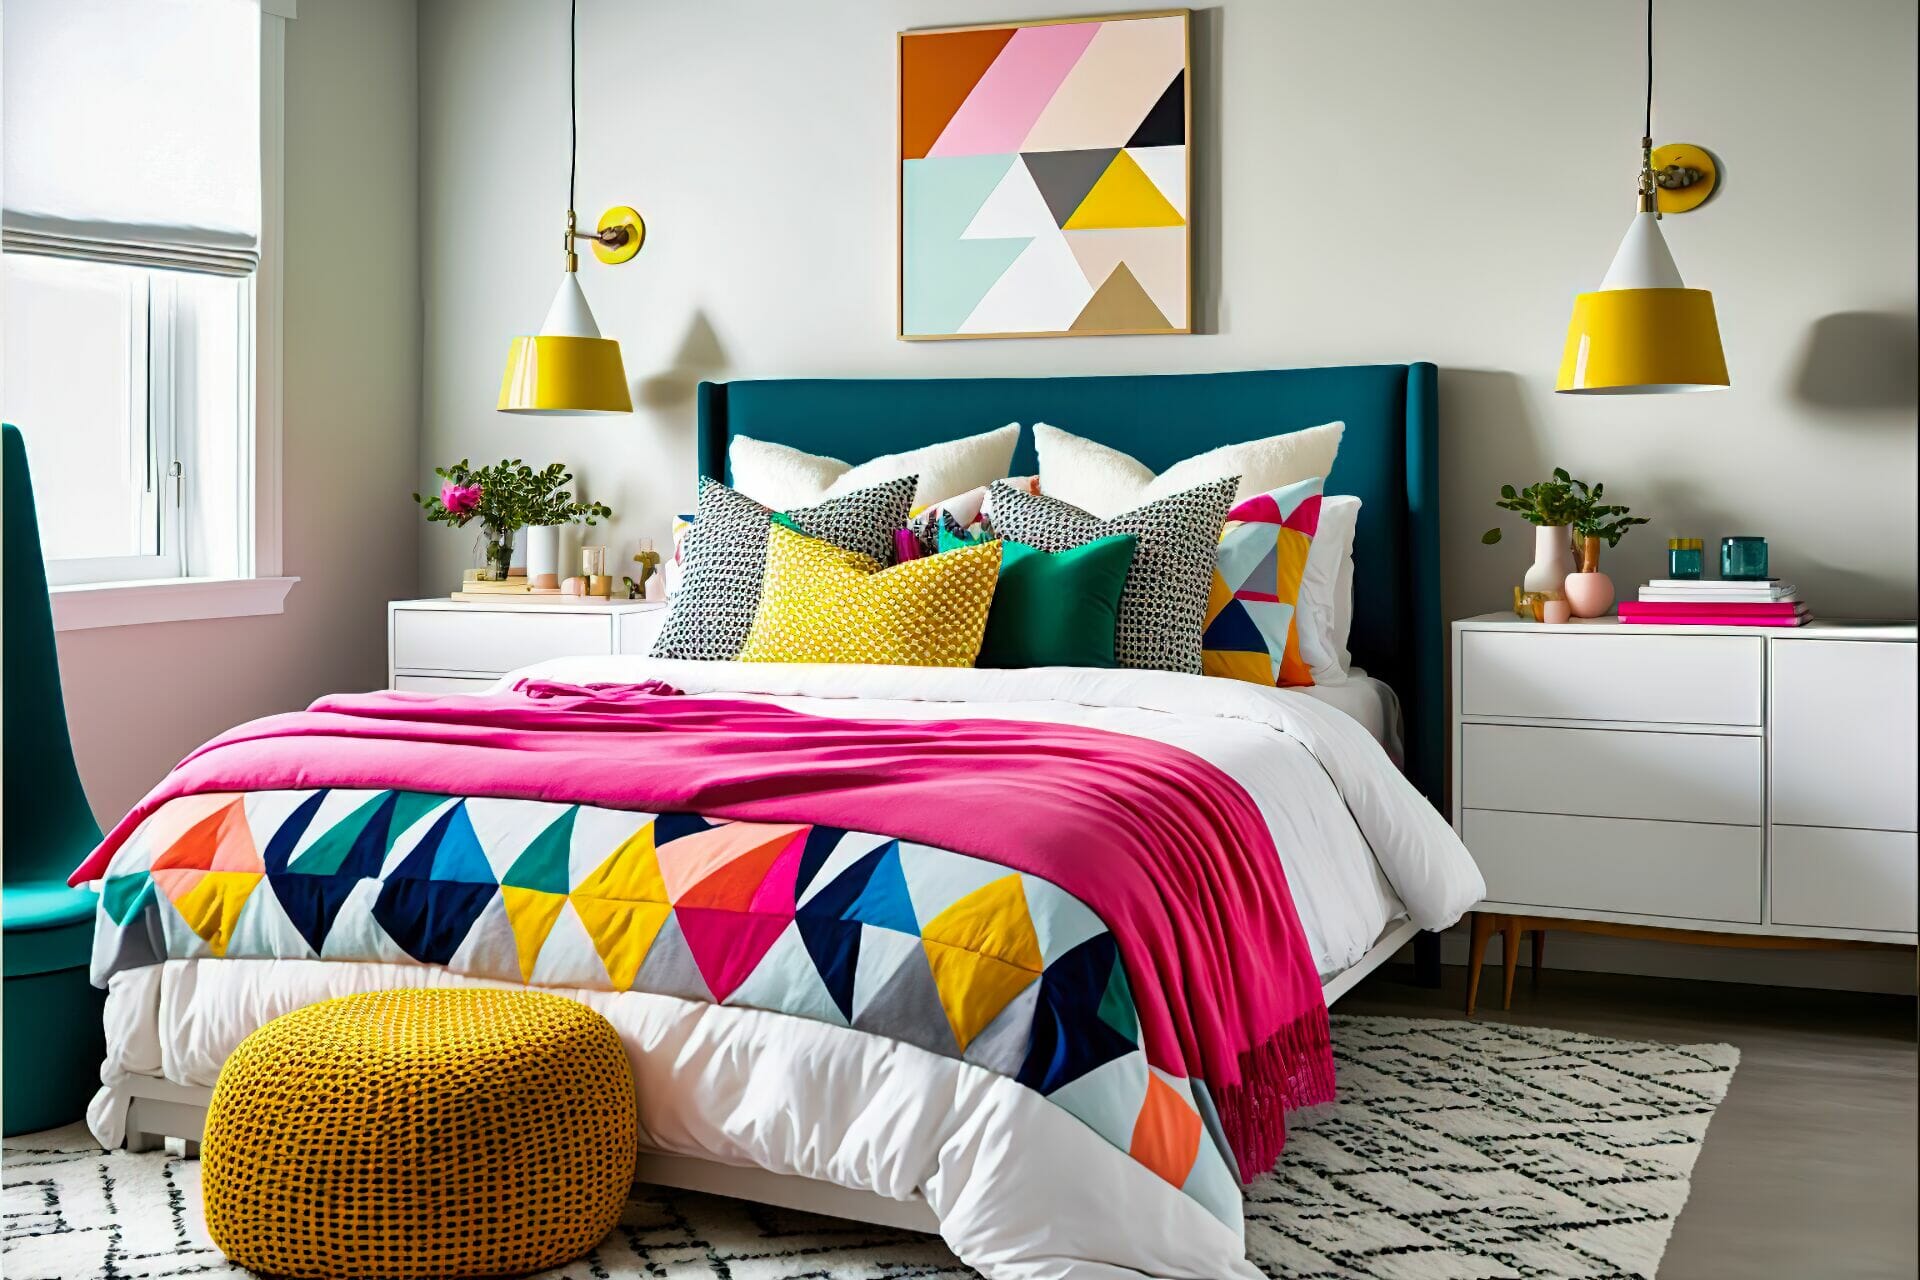 A Scandinavian Style Bedroom With Bright Pops Of Color – This Bedroom Is A Fun Mix Of Colors, With A White Bed Frame And Nightstand, A Bright Yellow Headboard, And Pink, Teal, And Green Accent Pillows And Throws. Art Prints With Geometric Shapes In Bright Colors Hang On The Walls, And A Light Grey Rug Is On The Floor.